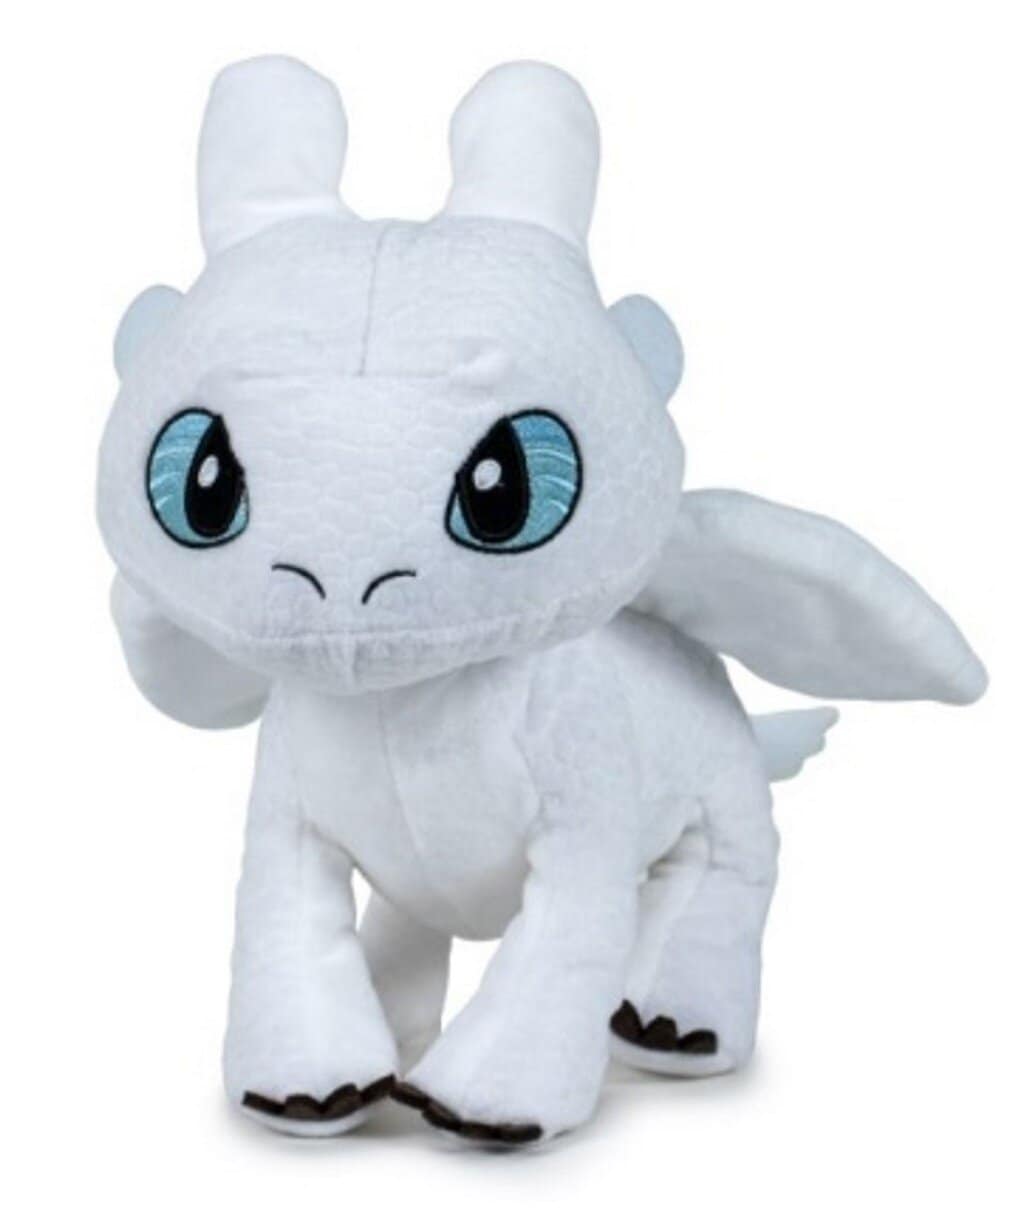 How to Train Your Dragon - Pluche Knuffel Light Fury 25 cm